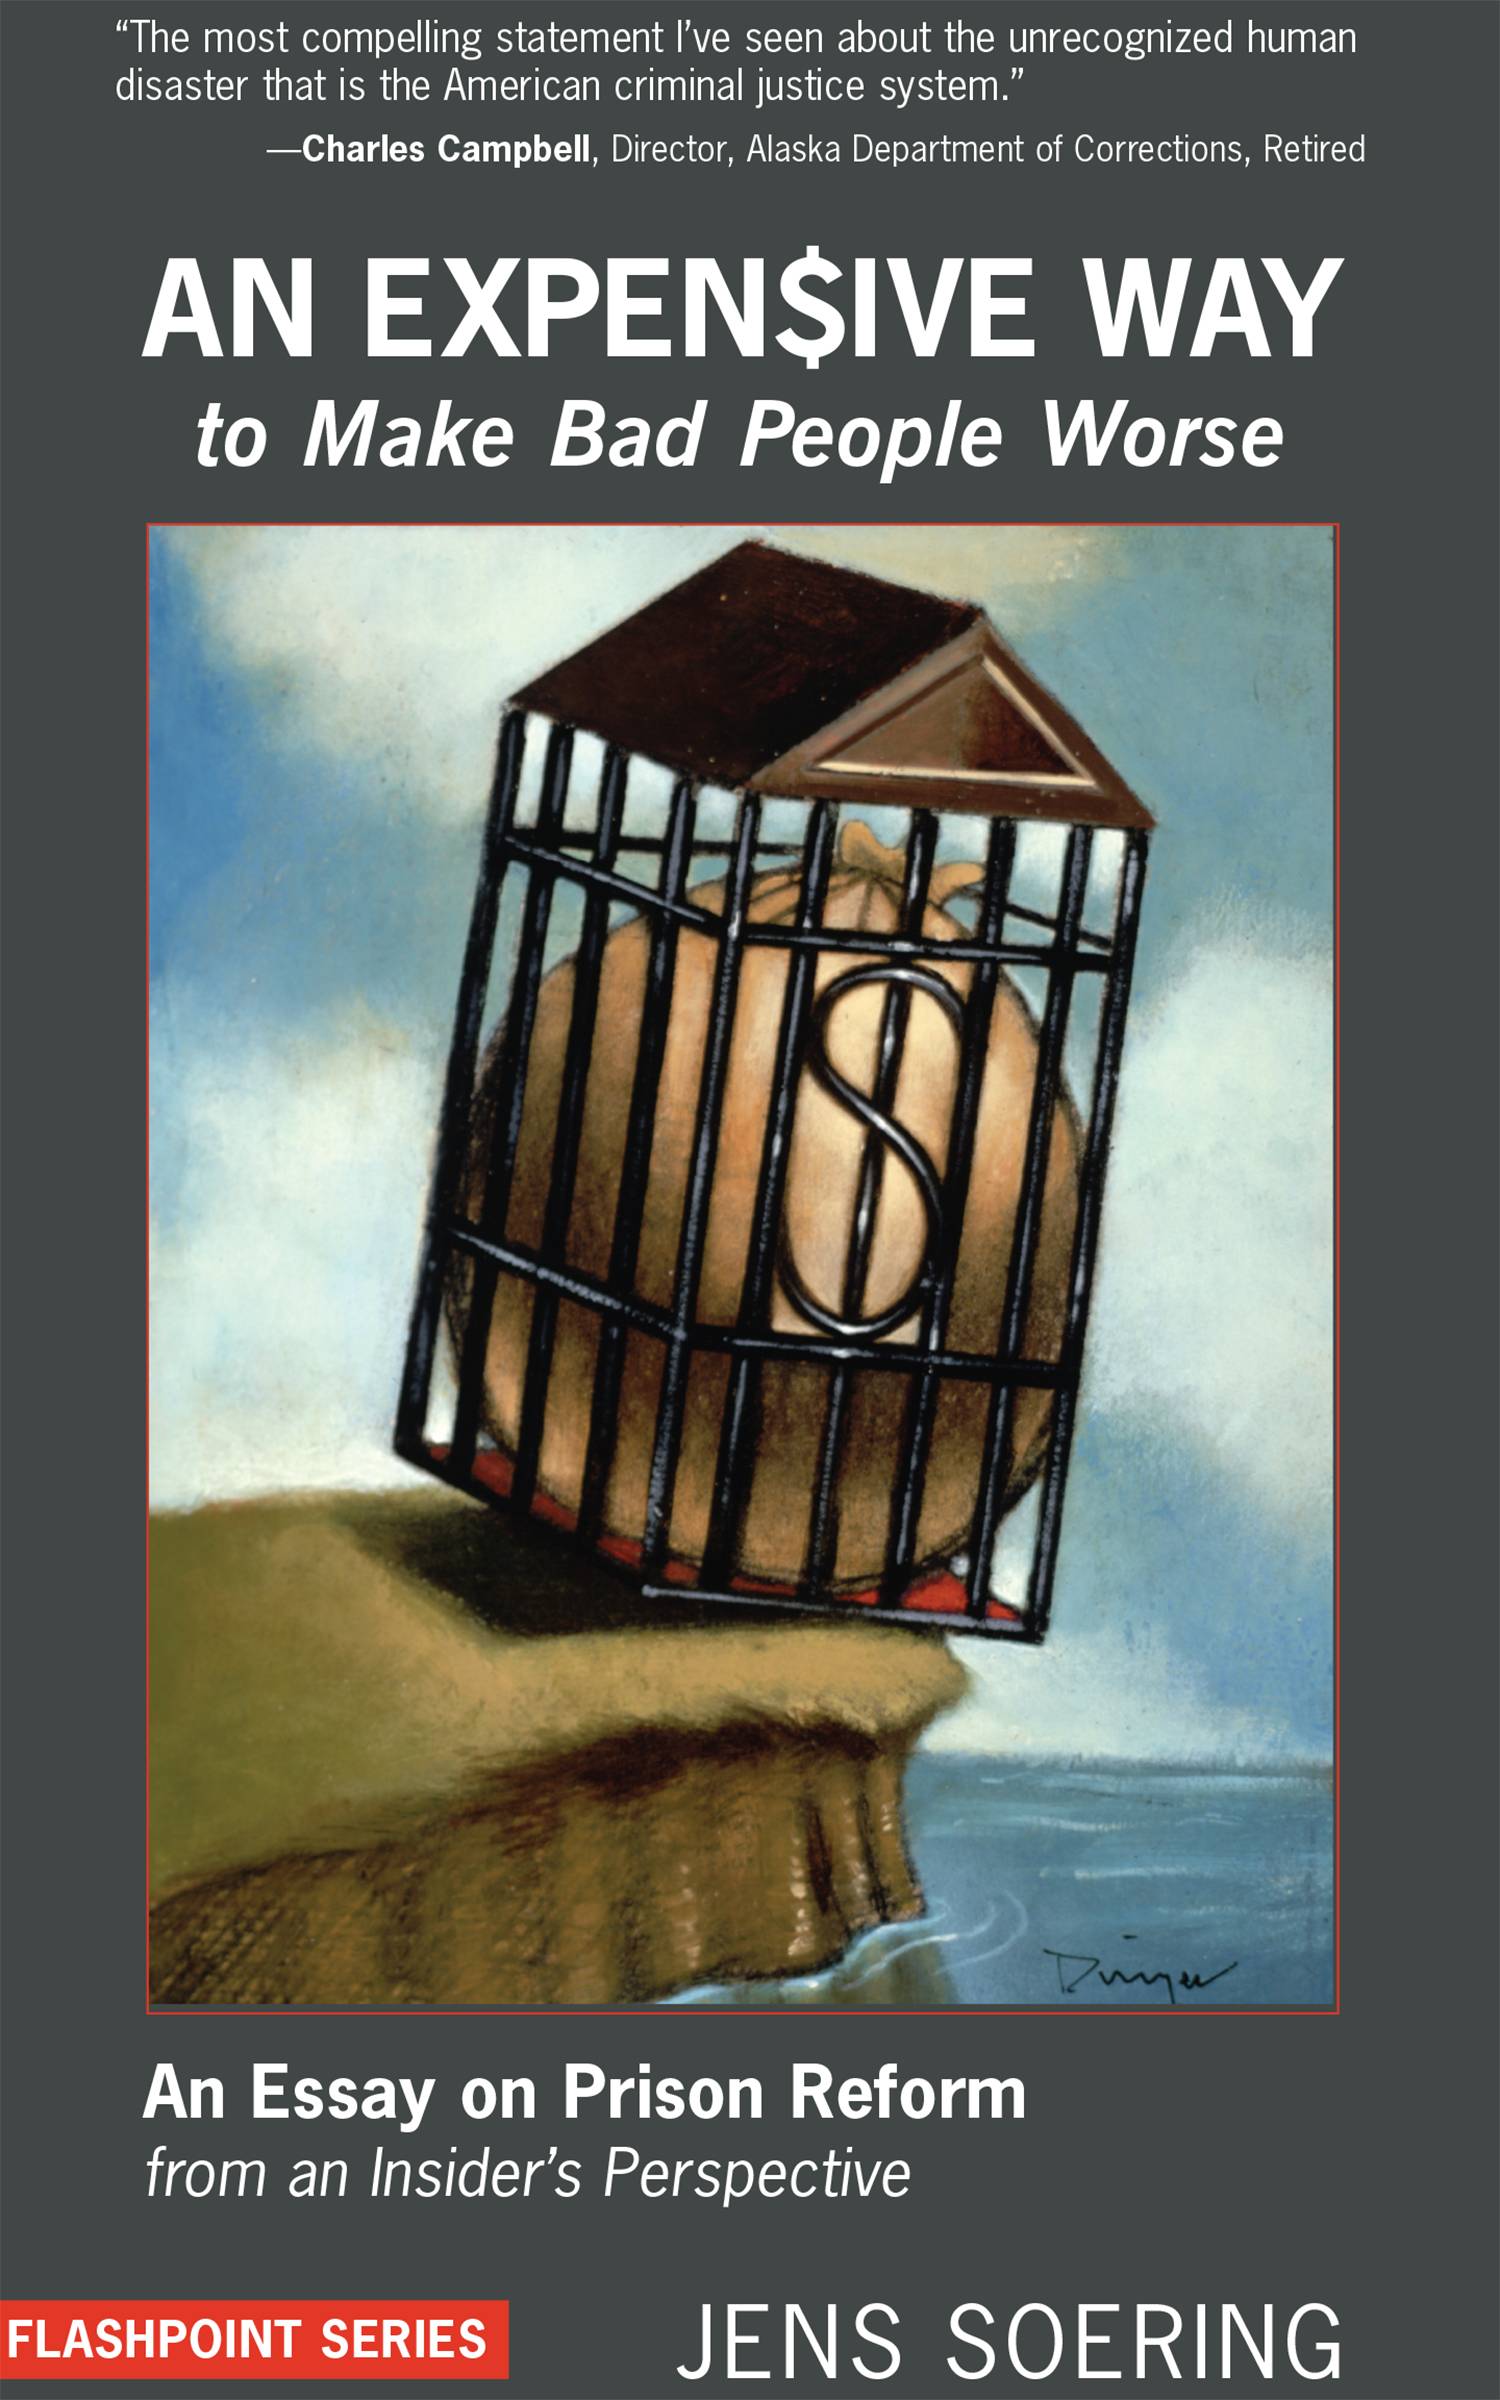 Expensive way to make bad people worse - an essay on prison reform from an